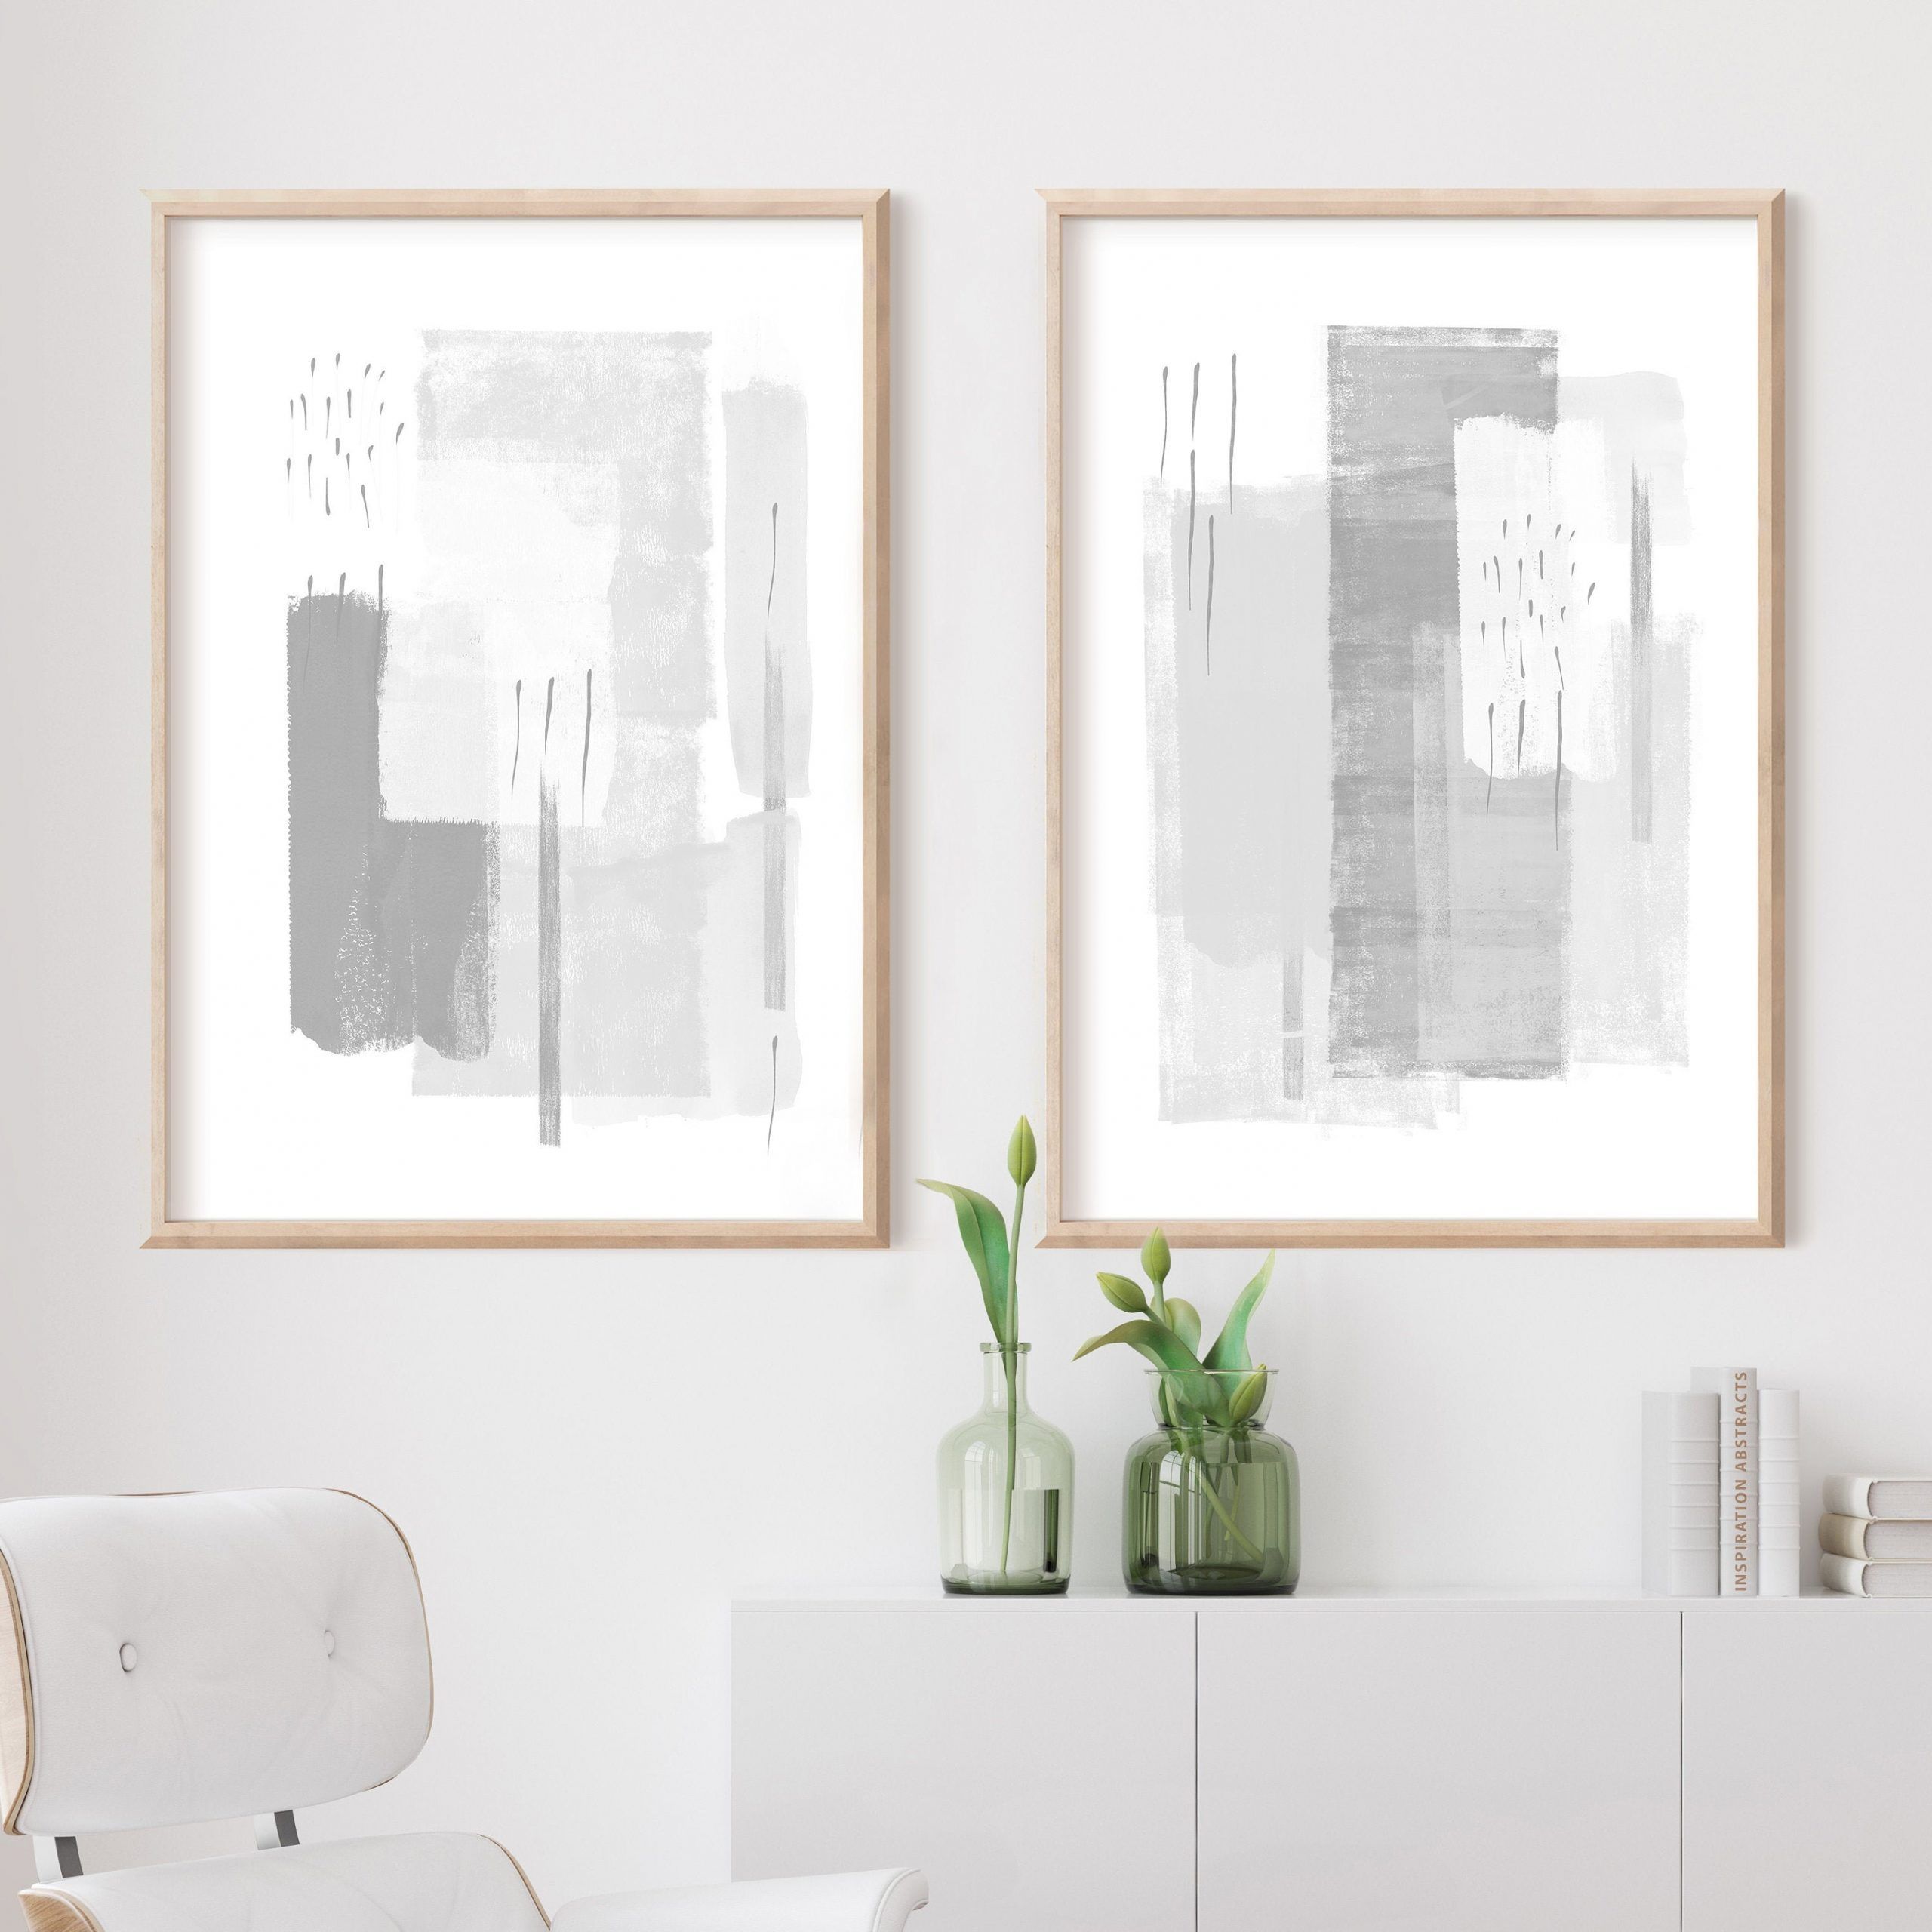 Large Minimal Art Grey White Wall Art Abstract Art Set Of – Etsy Within Best And Newest Minimalist Wall Art (View 11 of 20)